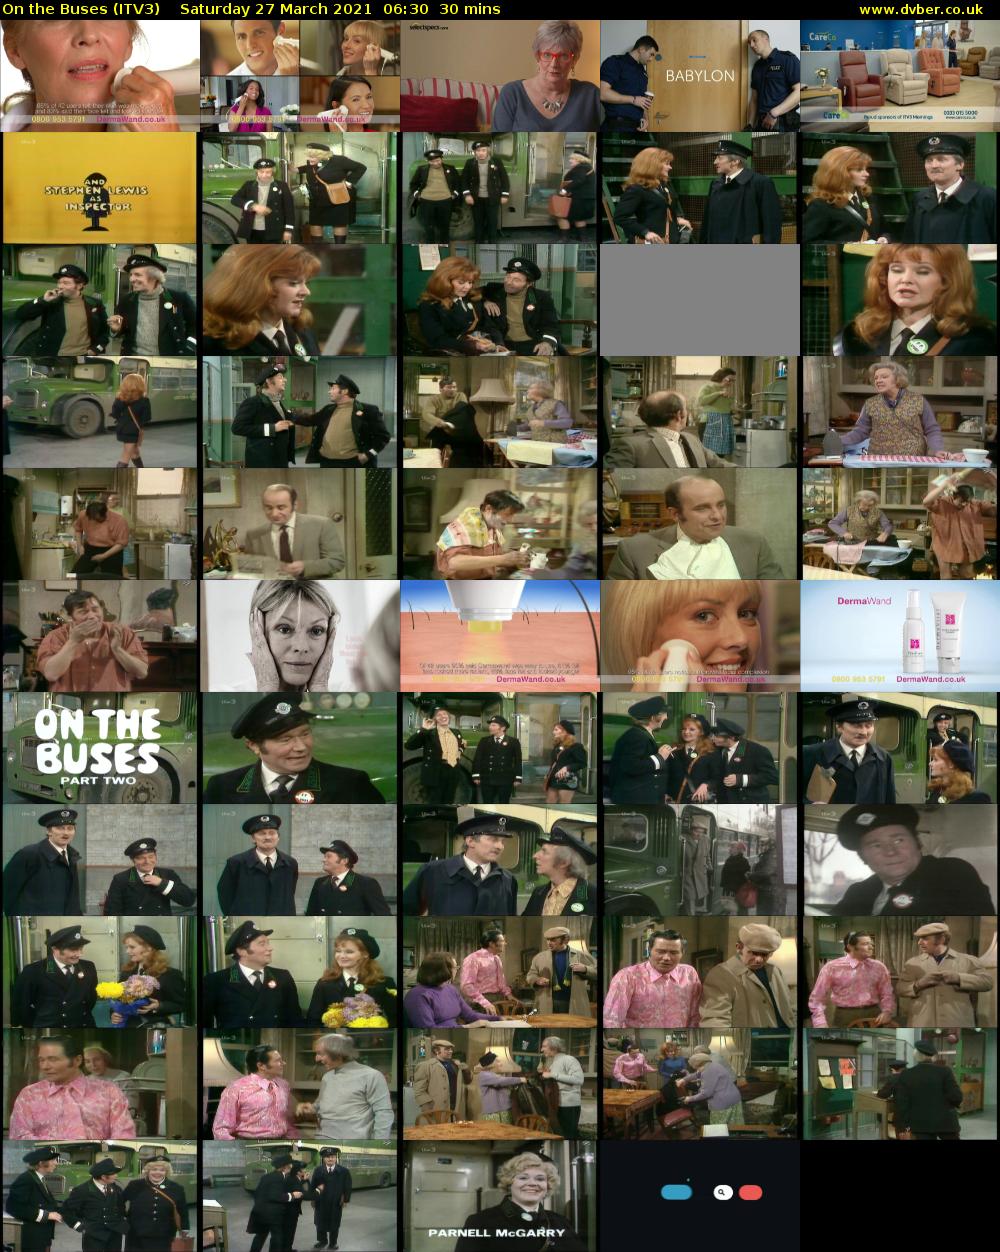 On the Buses (ITV3) Saturday 27 March 2021 06:30 - 07:00